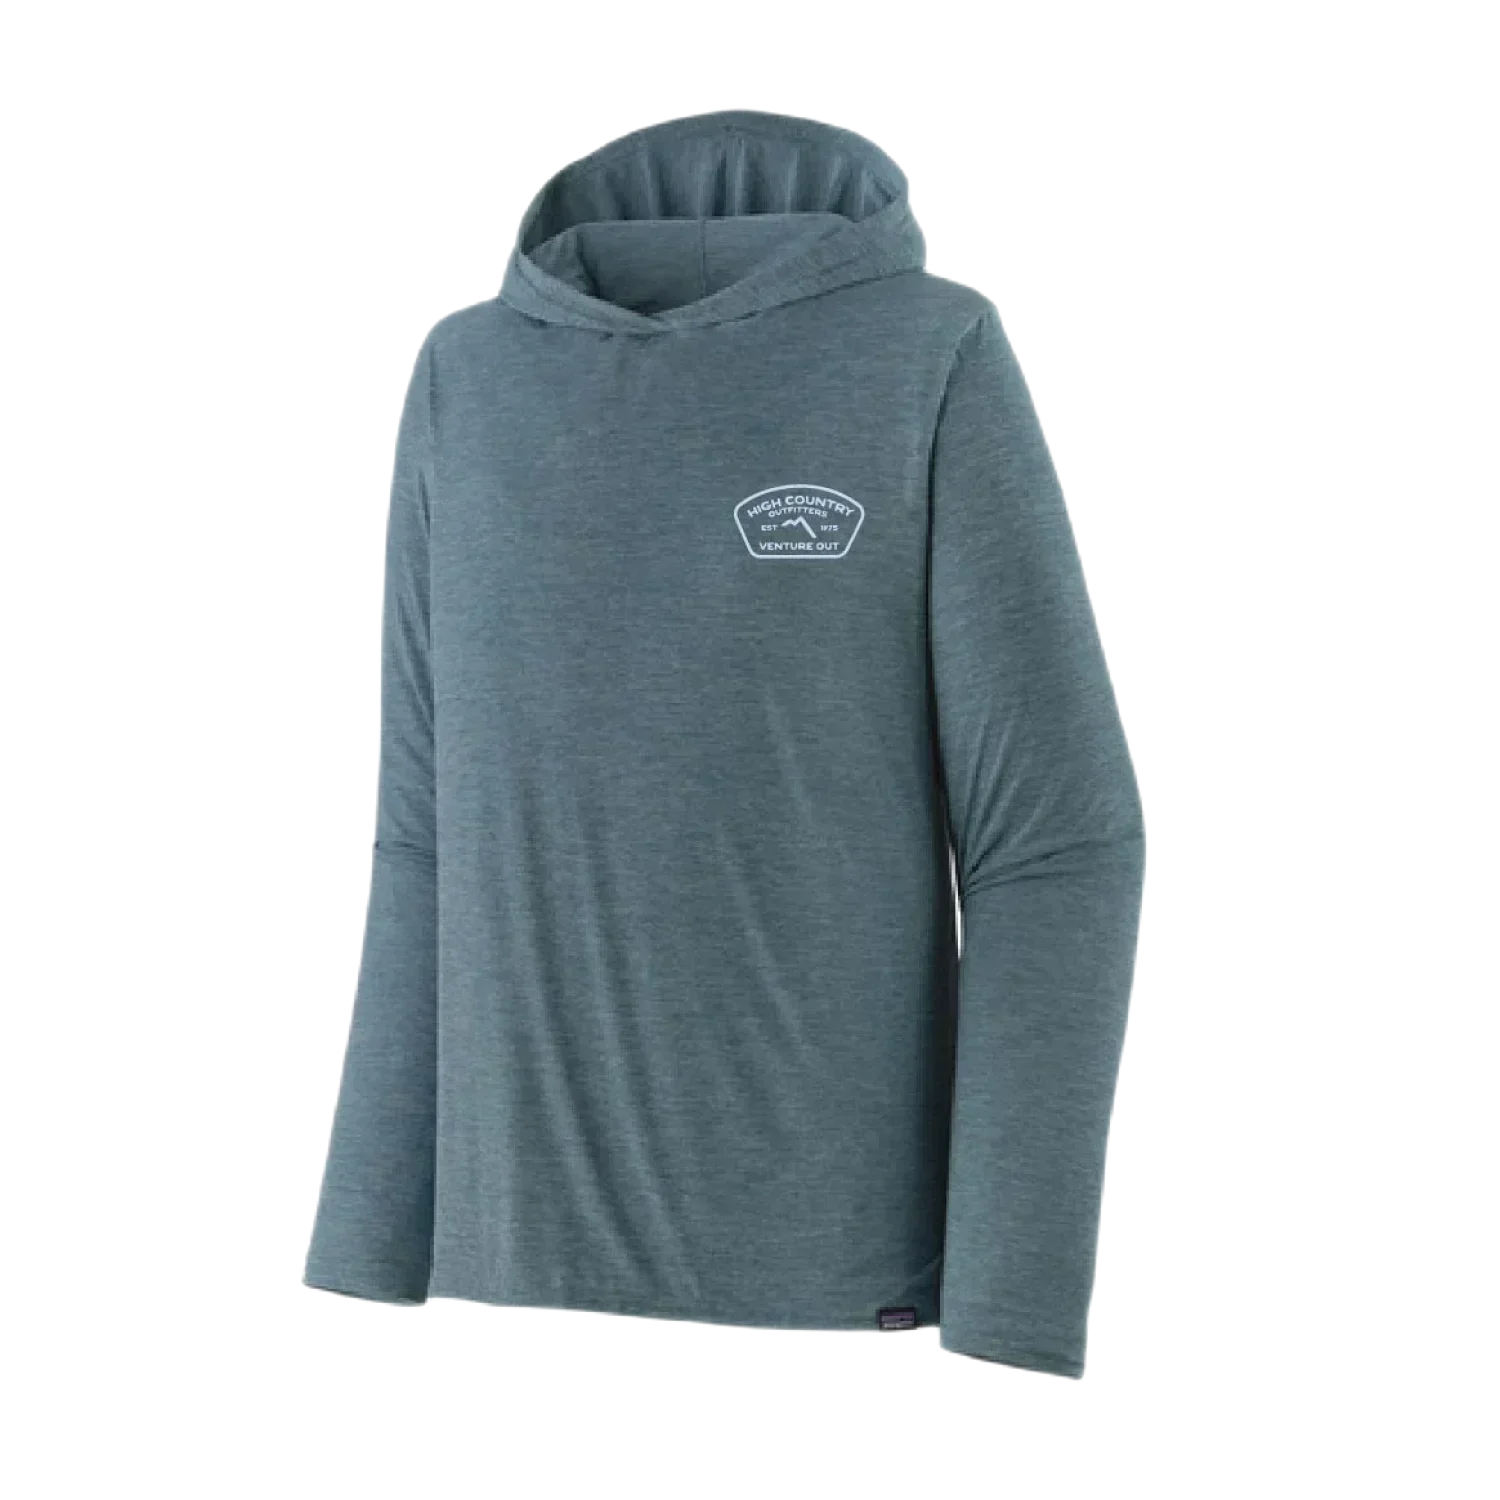 High Country Outfitters 01. MENS APPAREL - MENS LS SHIRTS - MENS LS HOODY Men's HC Capilene Cool Daily Hoody UTBX UTILITY BLUE - LIGHT UTILITY BLUE X-DYE